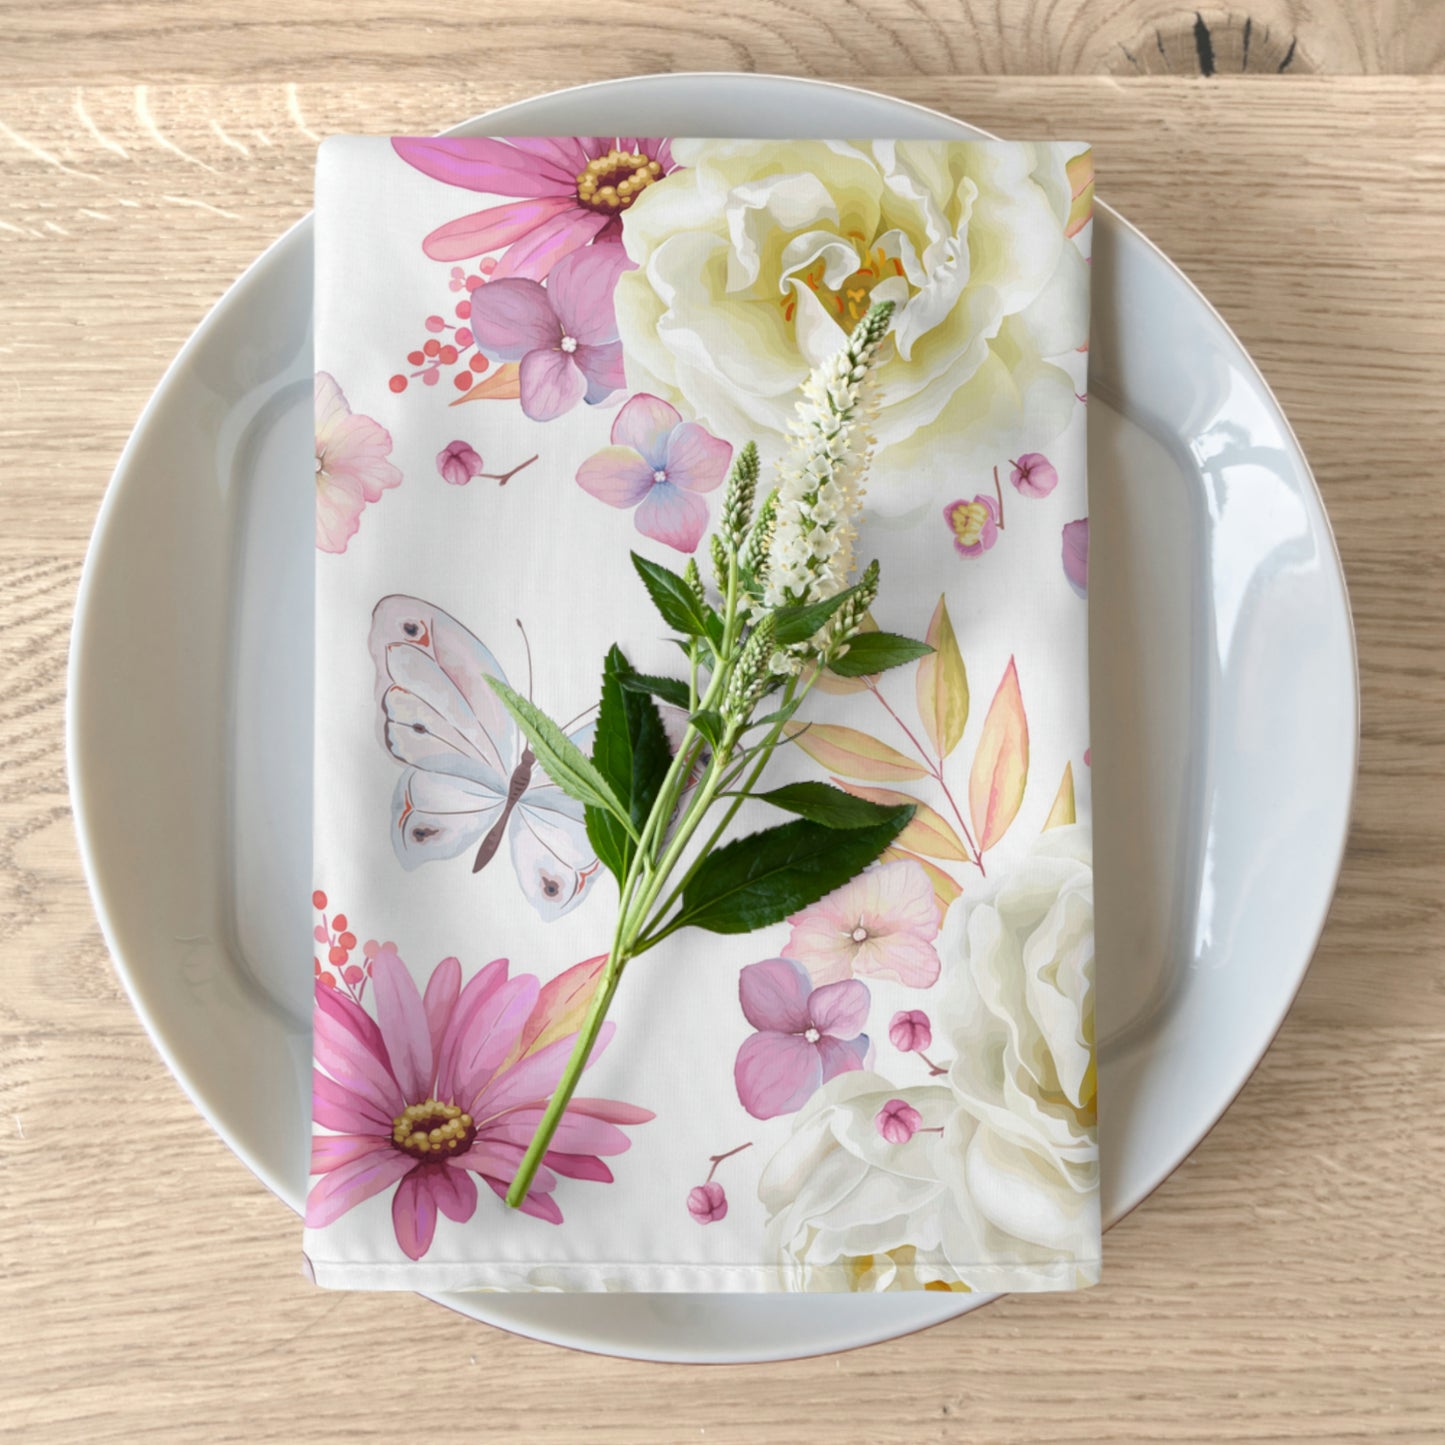 Spring Butterflies and Roses Napkins Set of Four